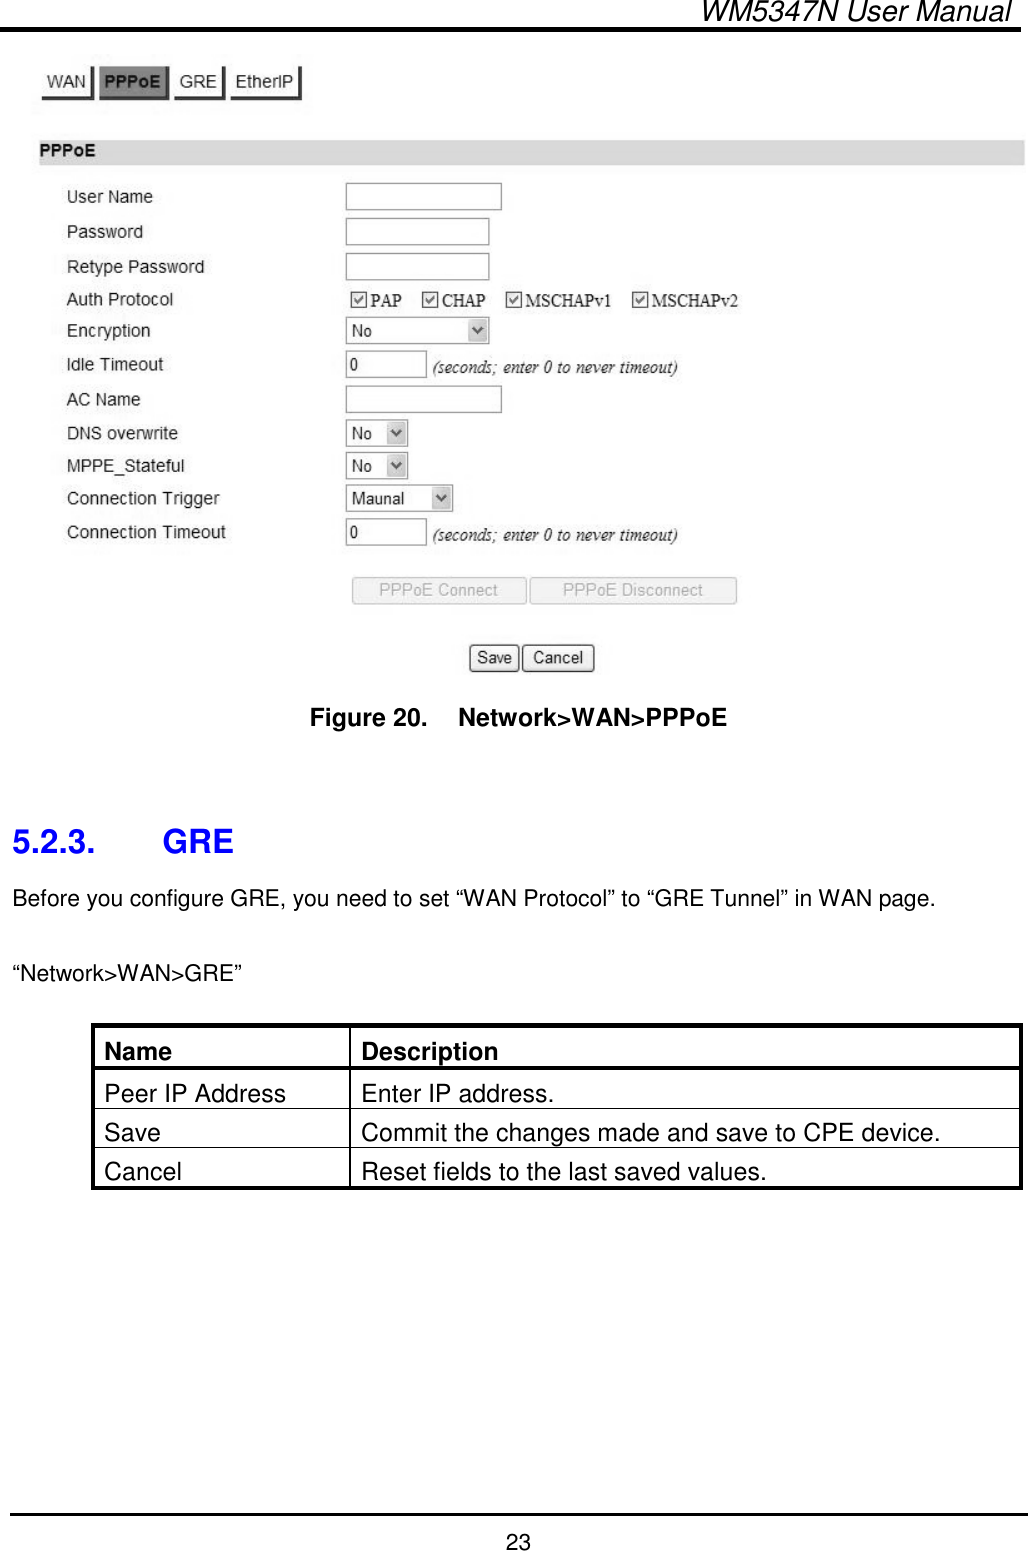  WM5347N User Manual  23  Figure 20.   Network&gt;WAN&gt;PPPoE   5.2.3.  GRE Before you configure GRE, you need to set “WAN Protocol” to “GRE Tunnel” in WAN page.  “Network&gt;WAN&gt;GRE”  Name  Description Peer IP Address  Enter IP address. Save  Commit the changes made and save to CPE device. Cancel  Reset fields to the last saved values.   